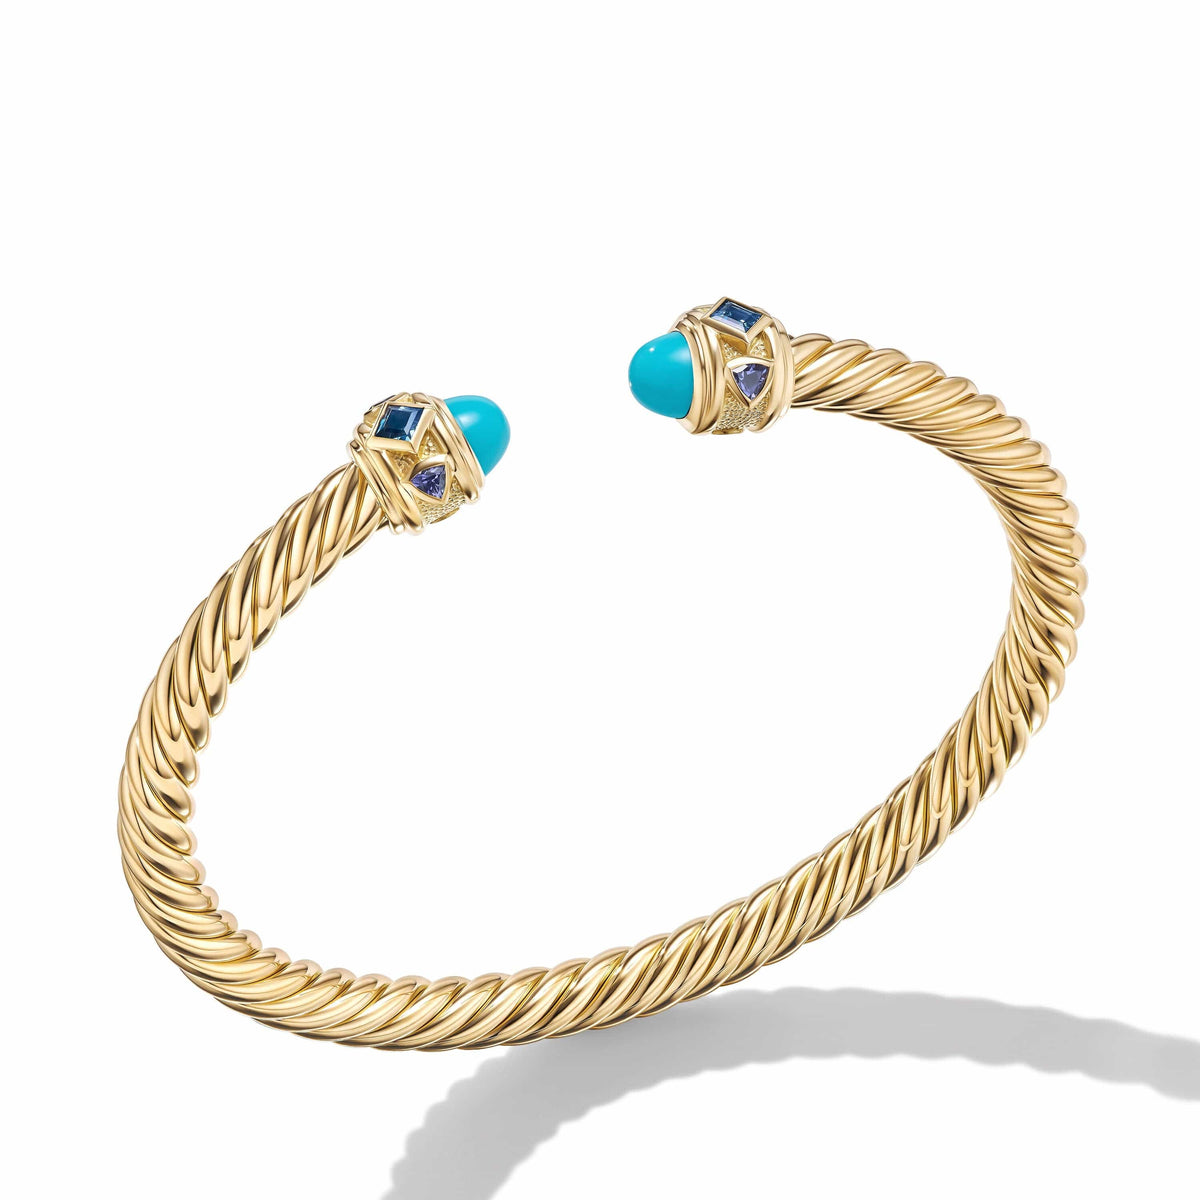 Renaissance® Bracelet in 18K Yellow Gold with Turquoise, Hampton Blue Topaz and Iolite